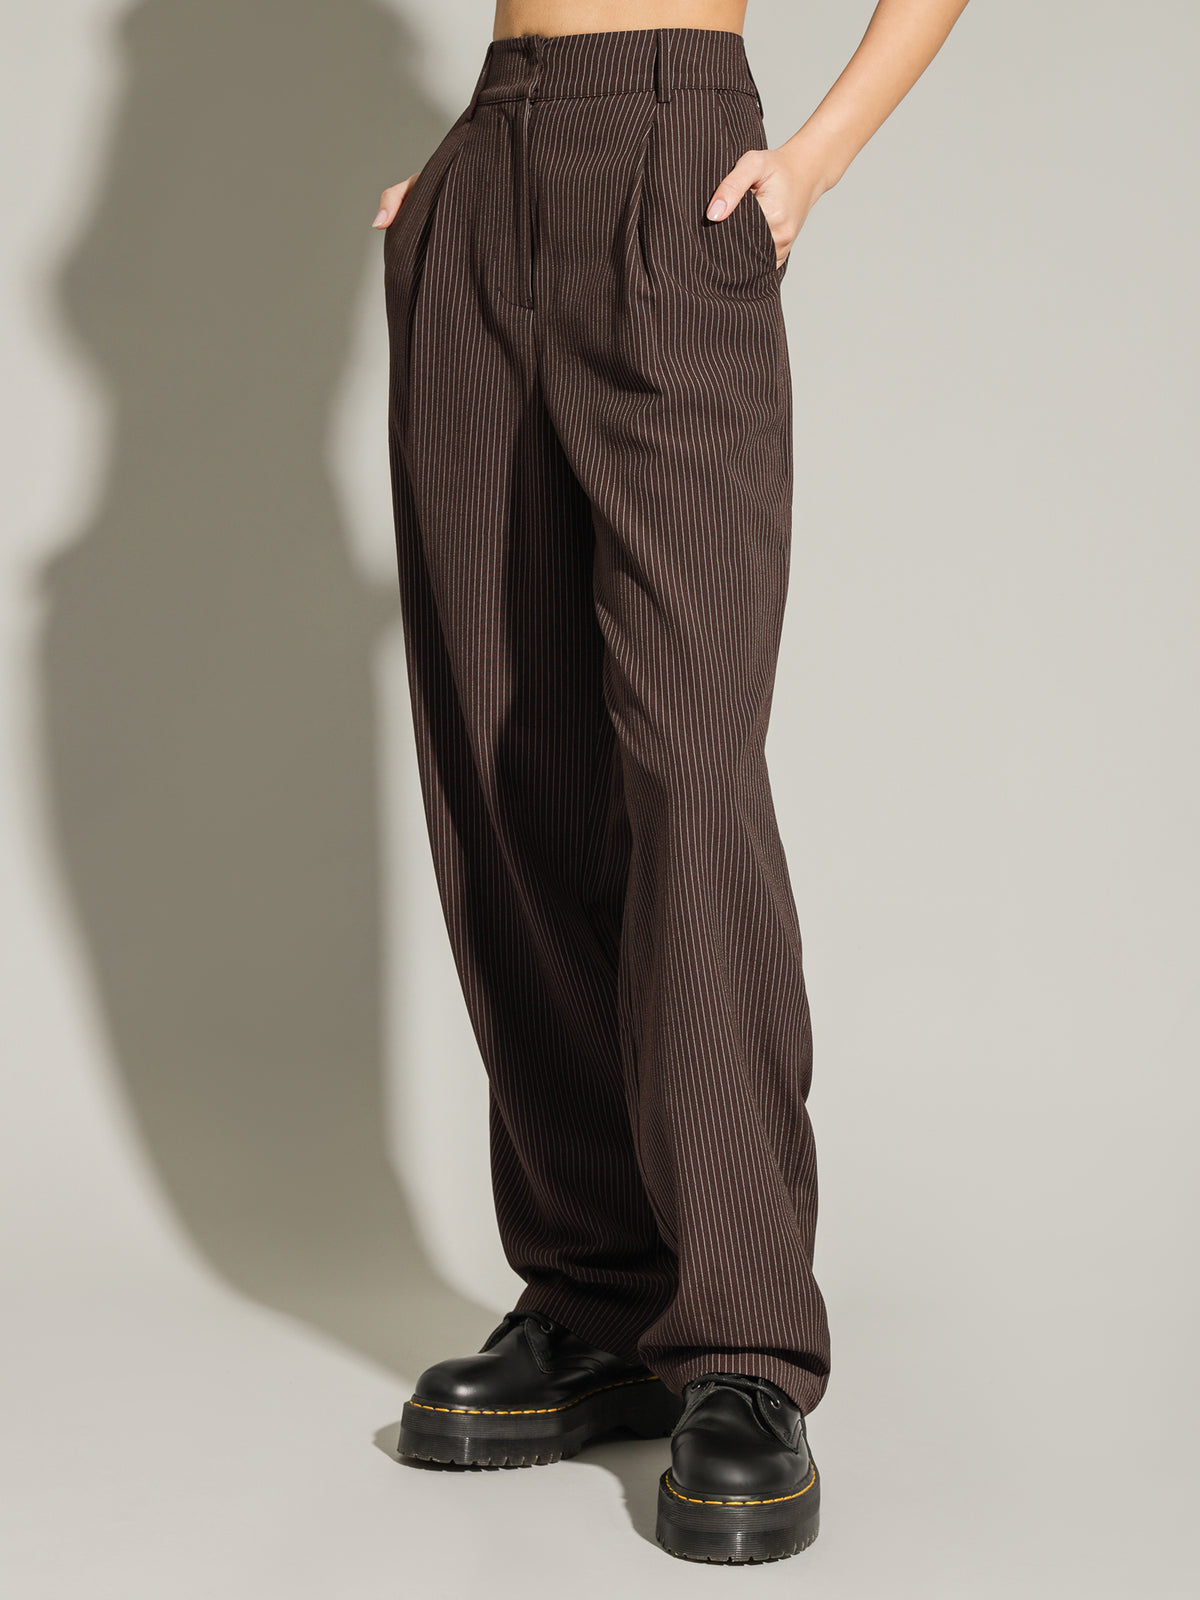 Sonia Tailored Pants in Pinstripe